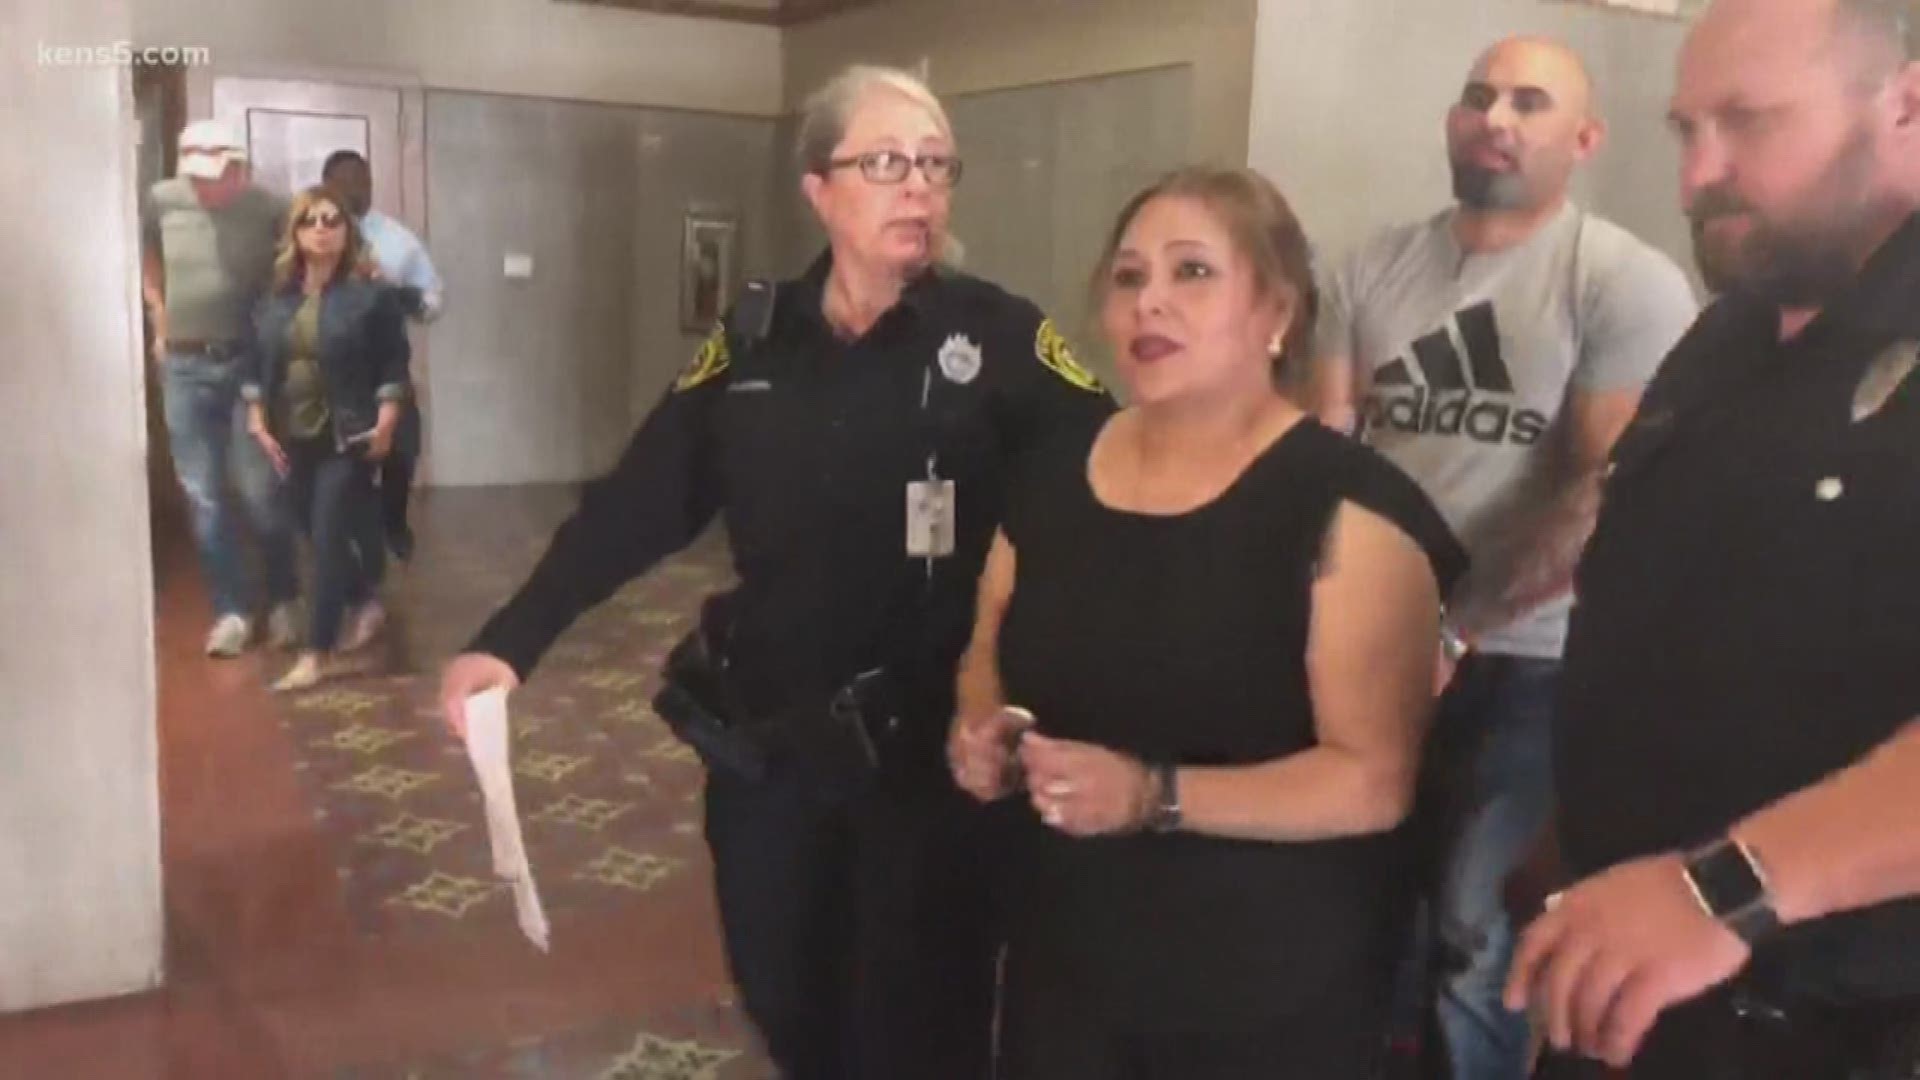 Former Bexar Co. Pct. 2 constable Michelle Barrientes Vela was indicted on multiple charges including tampering with evidence and perjury.